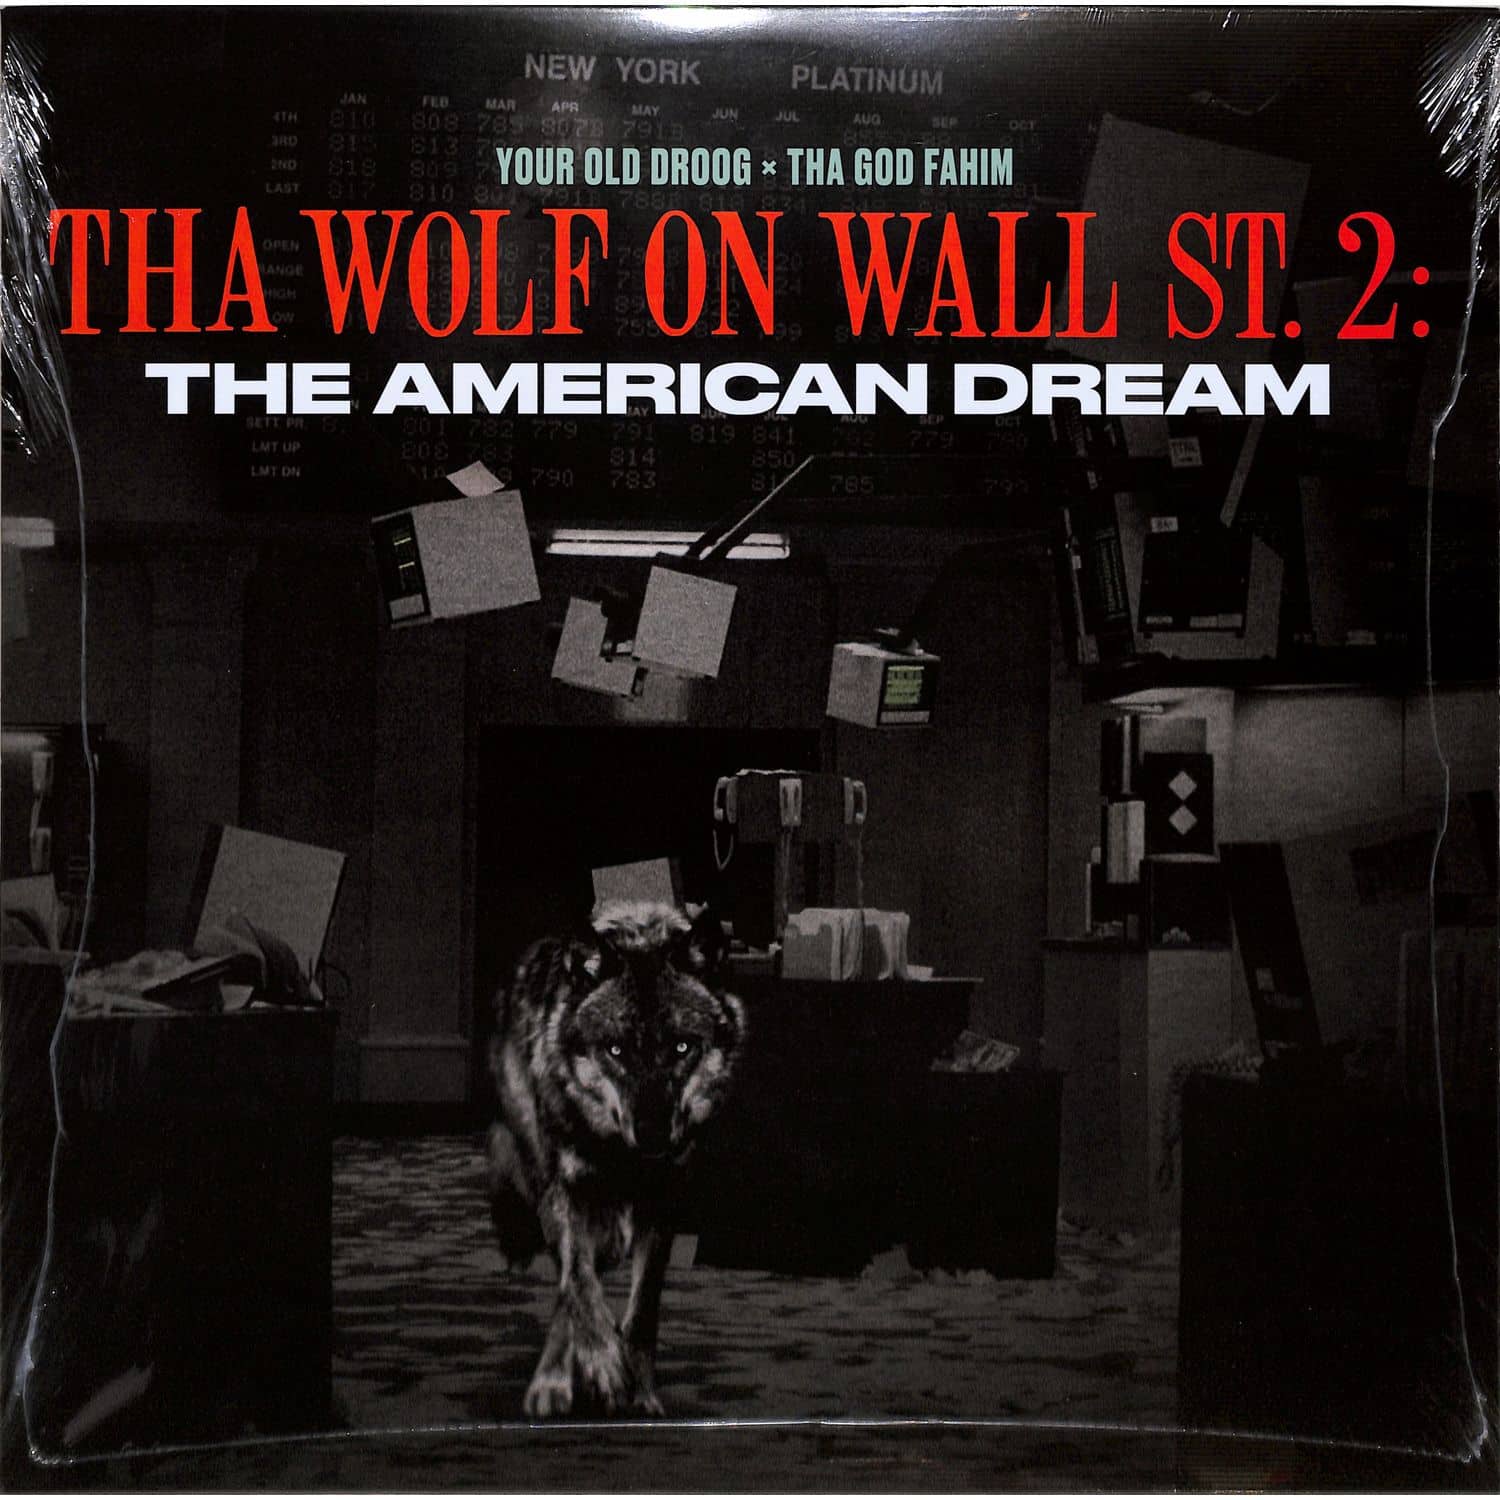 Your Old Droog & Tha God Fahim - THA WOLF ON WALL ST.2: THE AMERICAN DREAM